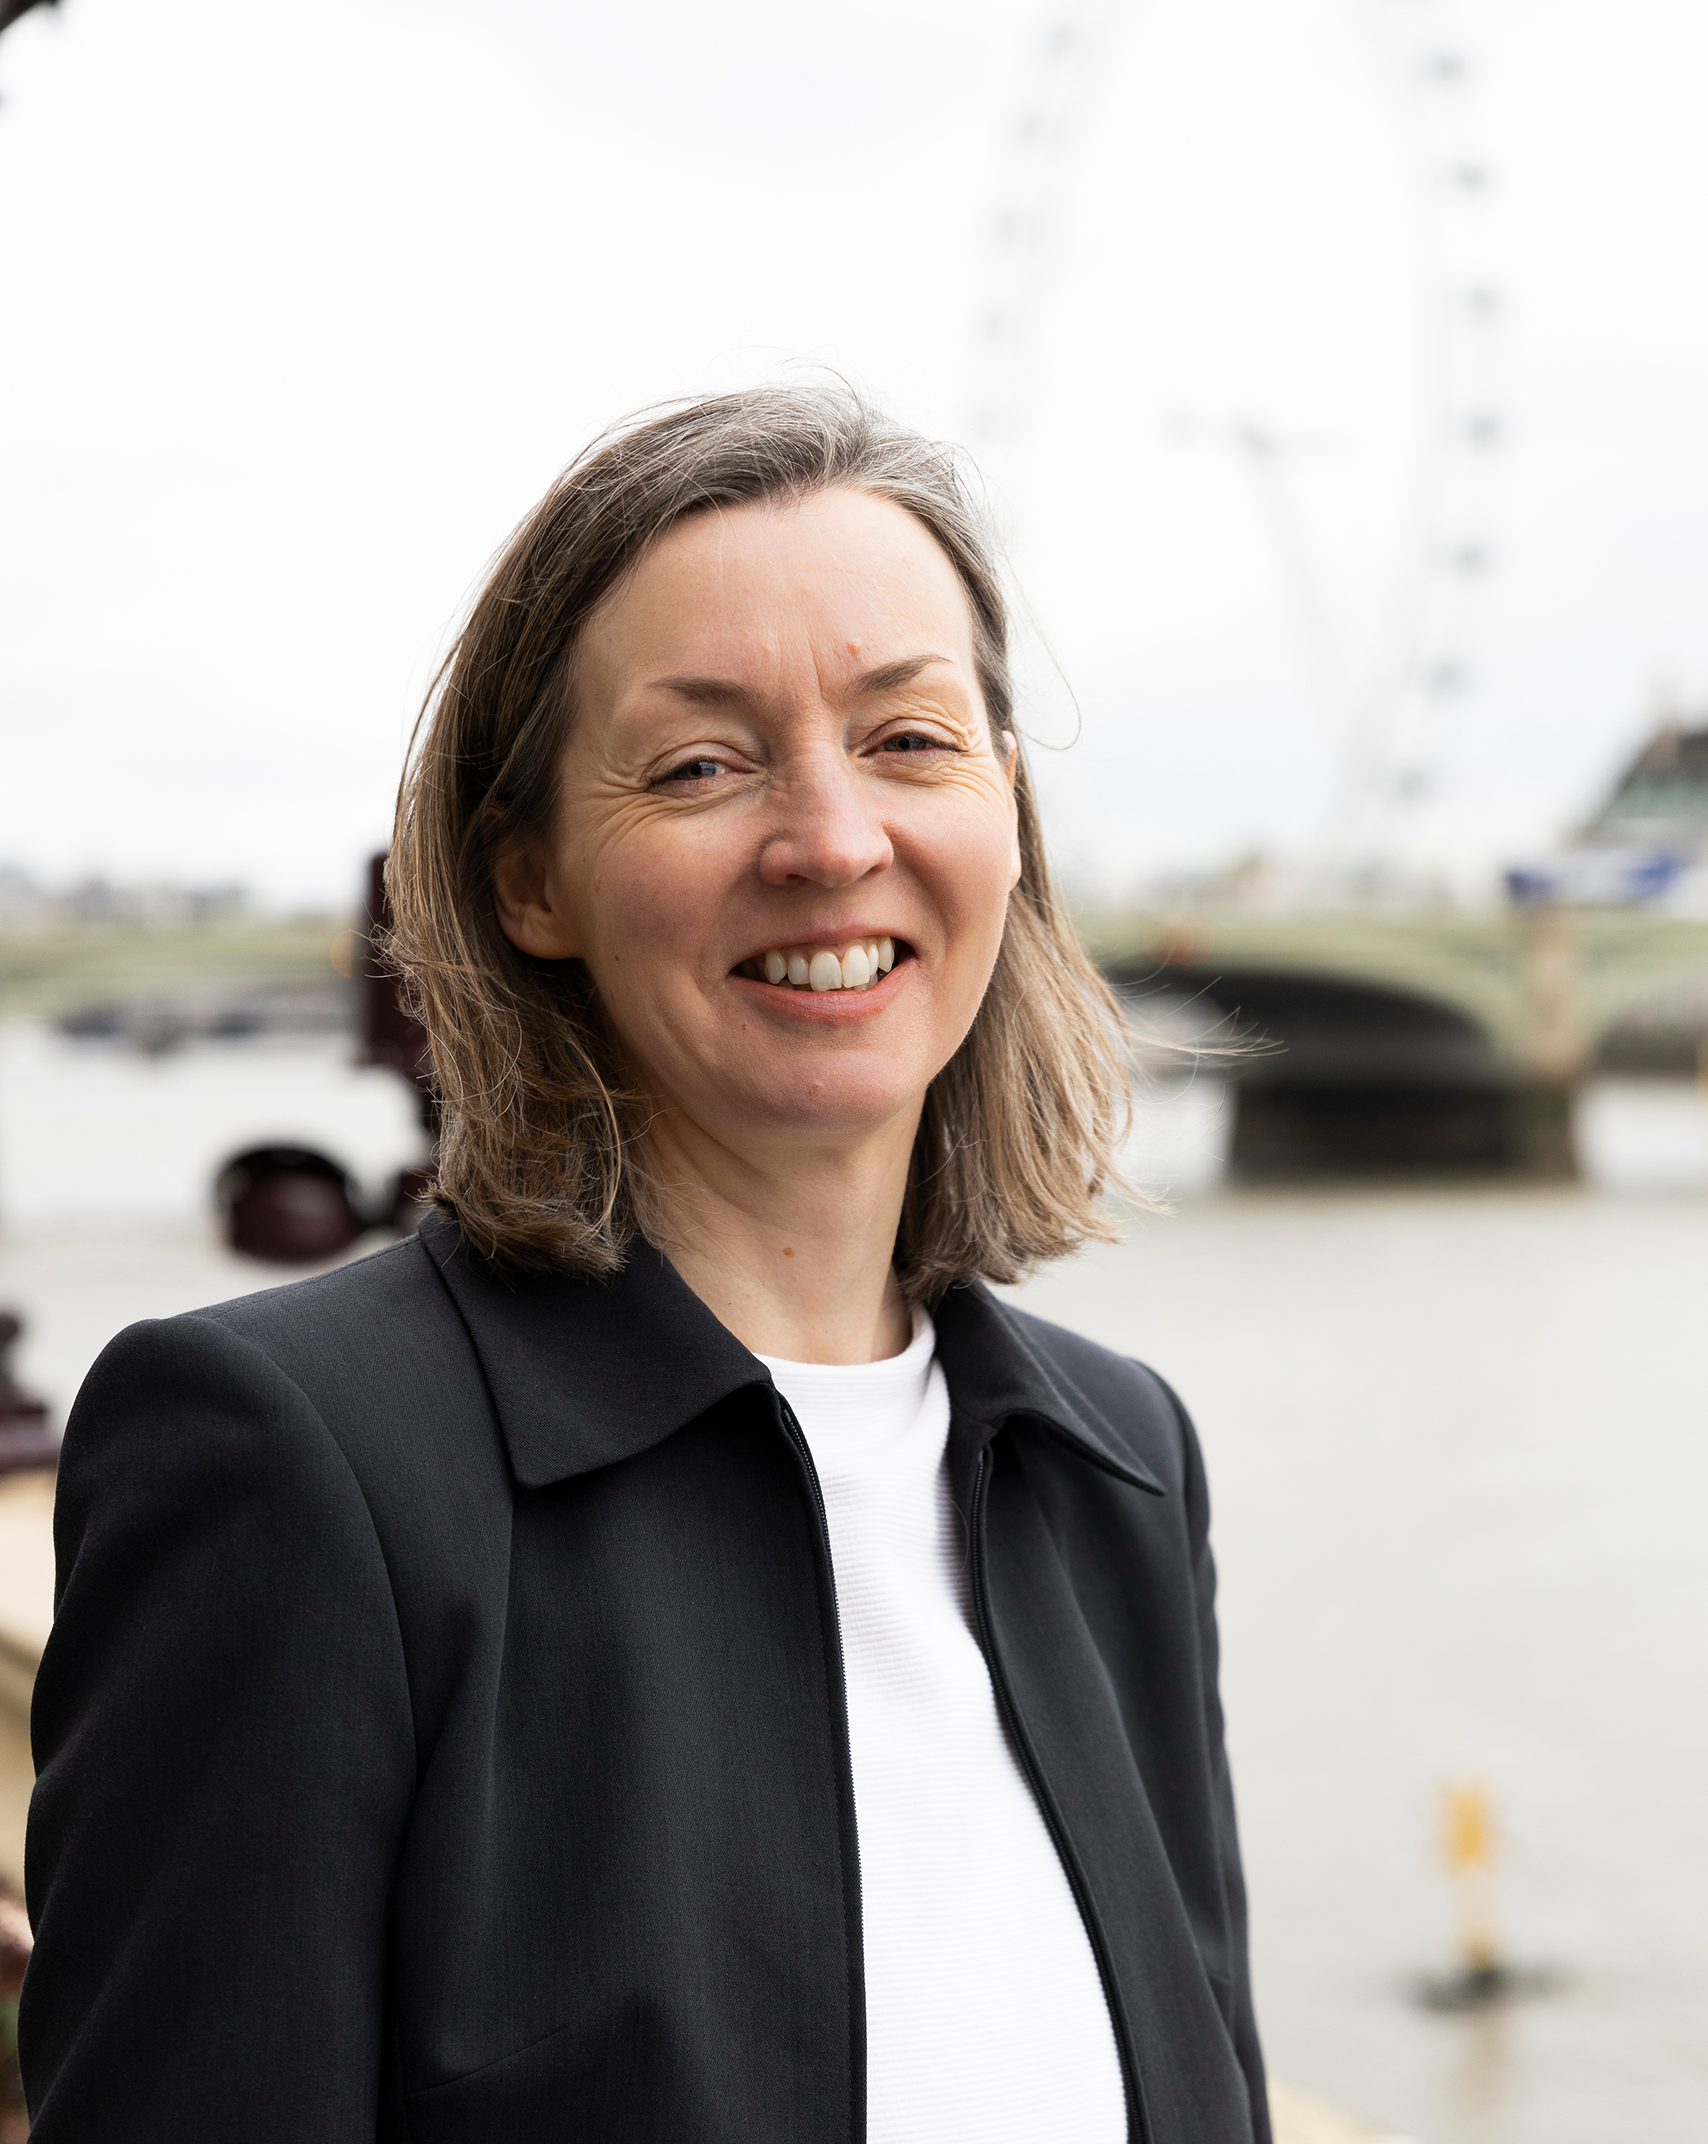 A headshot of Amy, from Genetic Alliance UK's Research team. She has shoulder length hair and smiles with a friendly smile. She stands by the Thames river at the Westminster Parliament building.